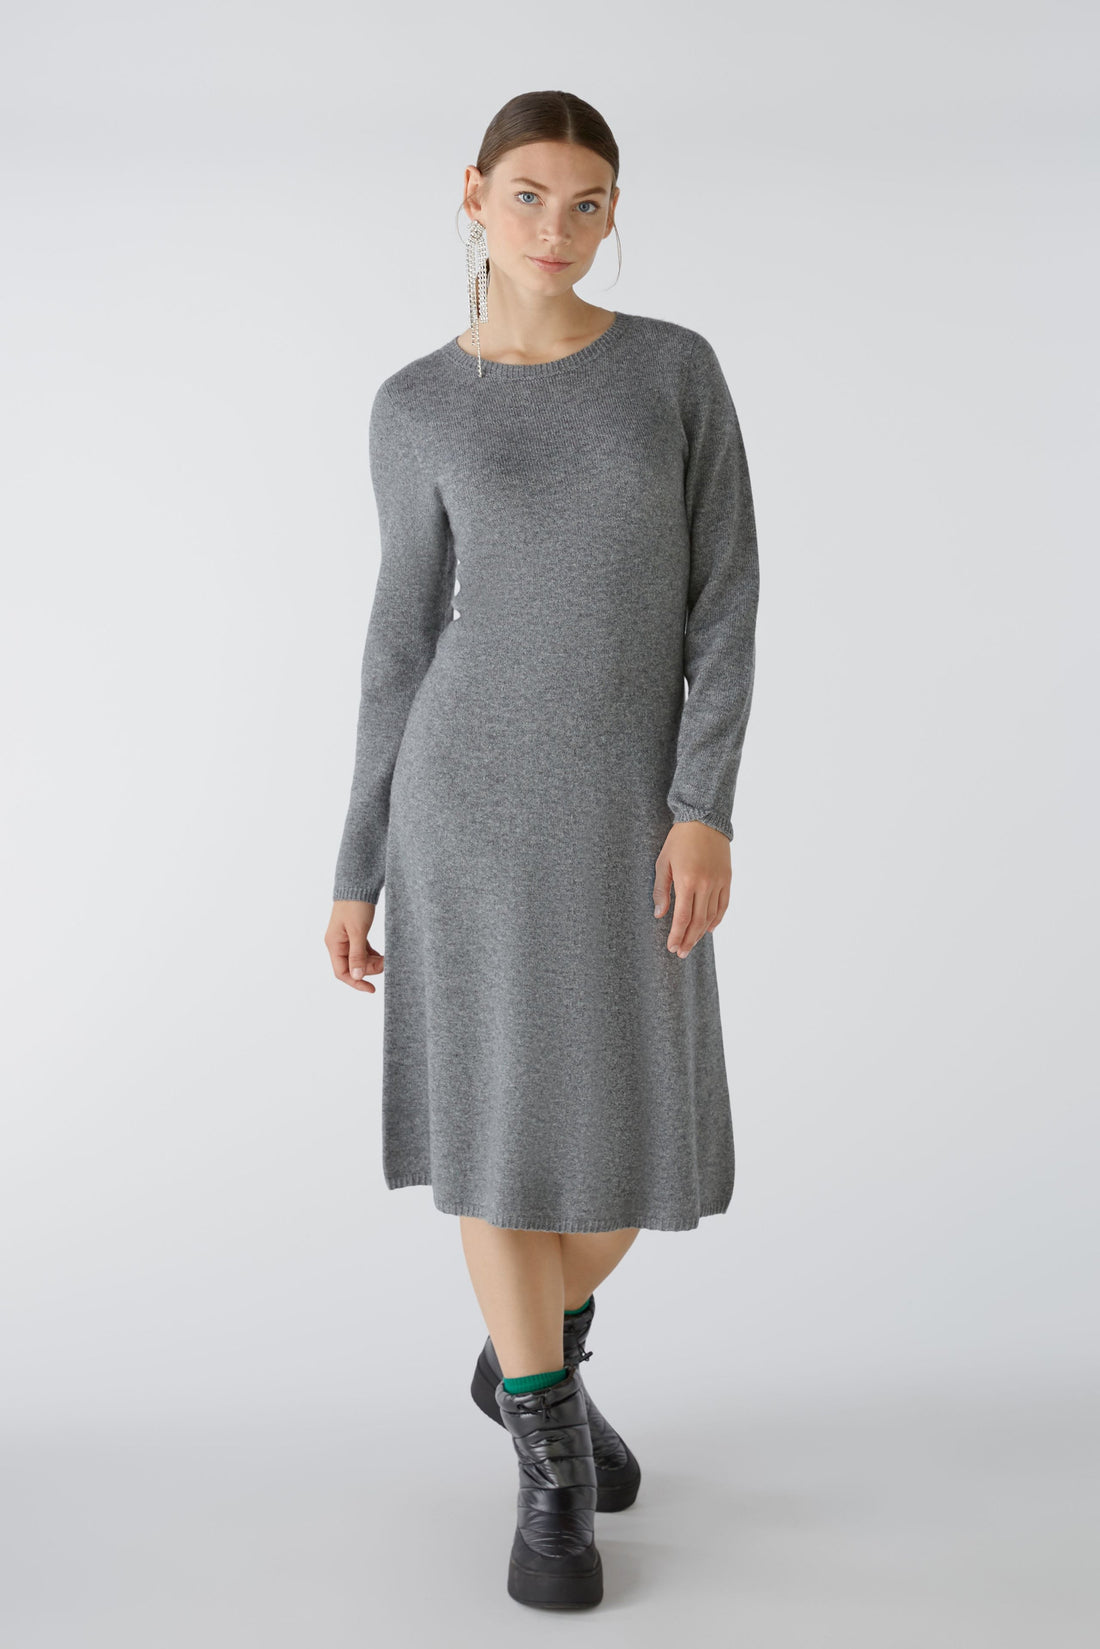 Knitted Dress Wool Blend With Modal_79699_9559_01